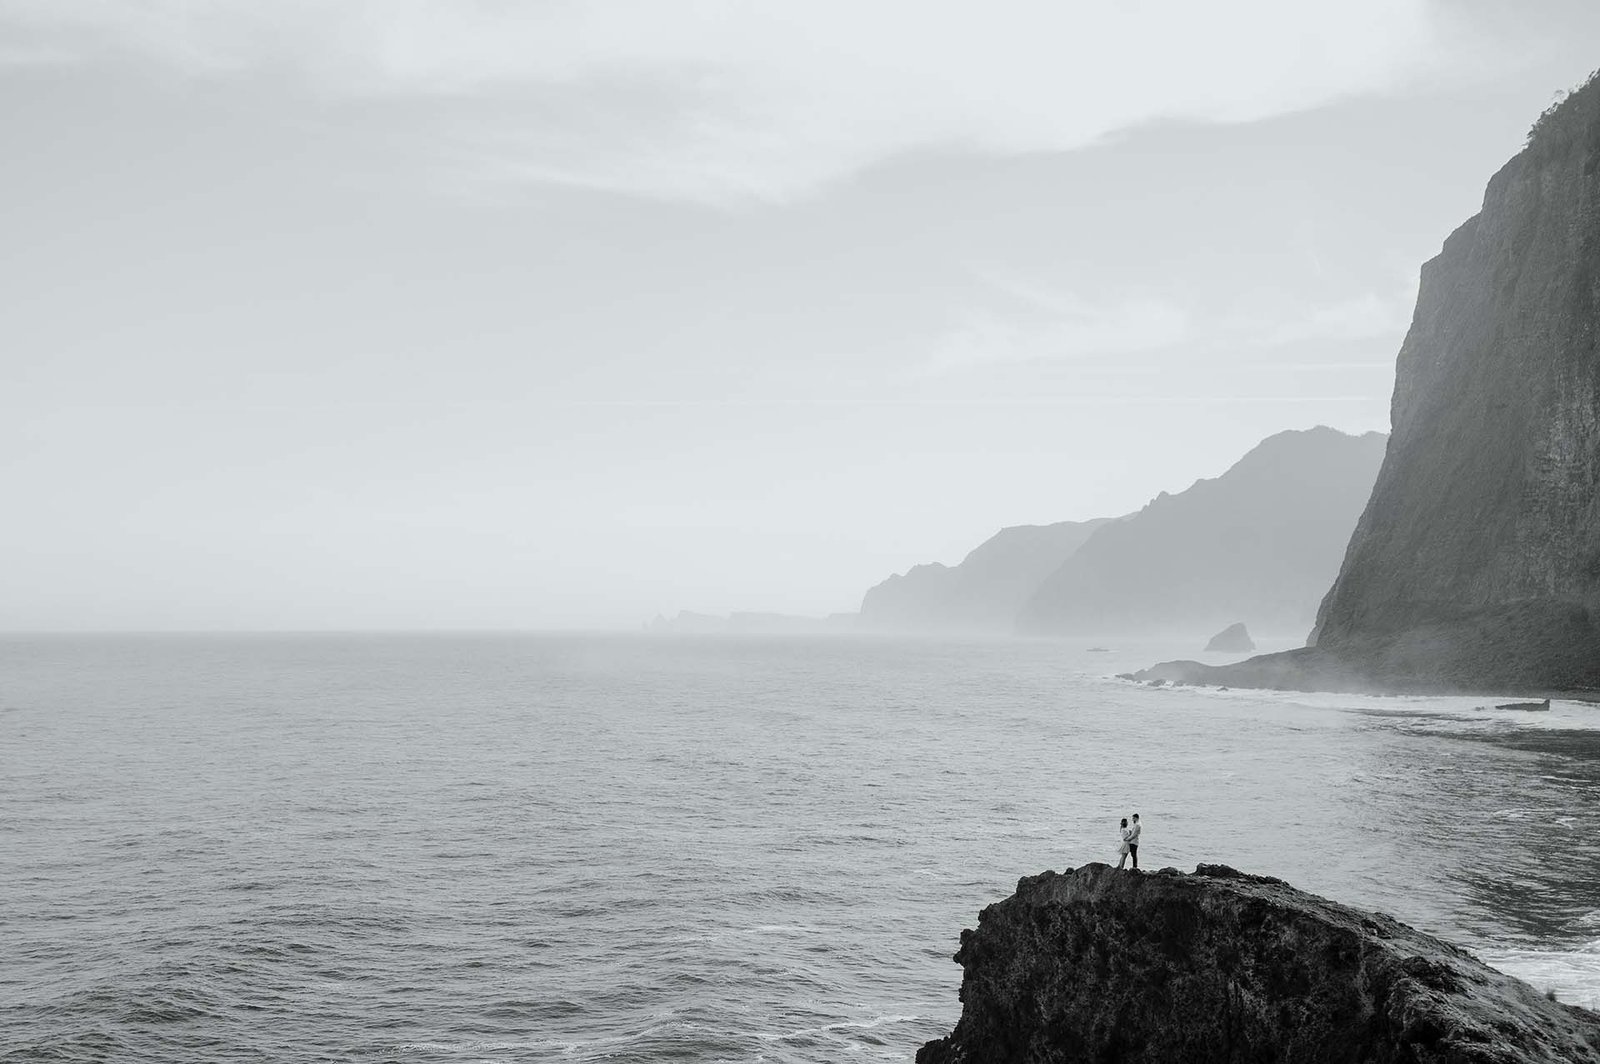 A couple in love at Crane viewpoint, Madeira